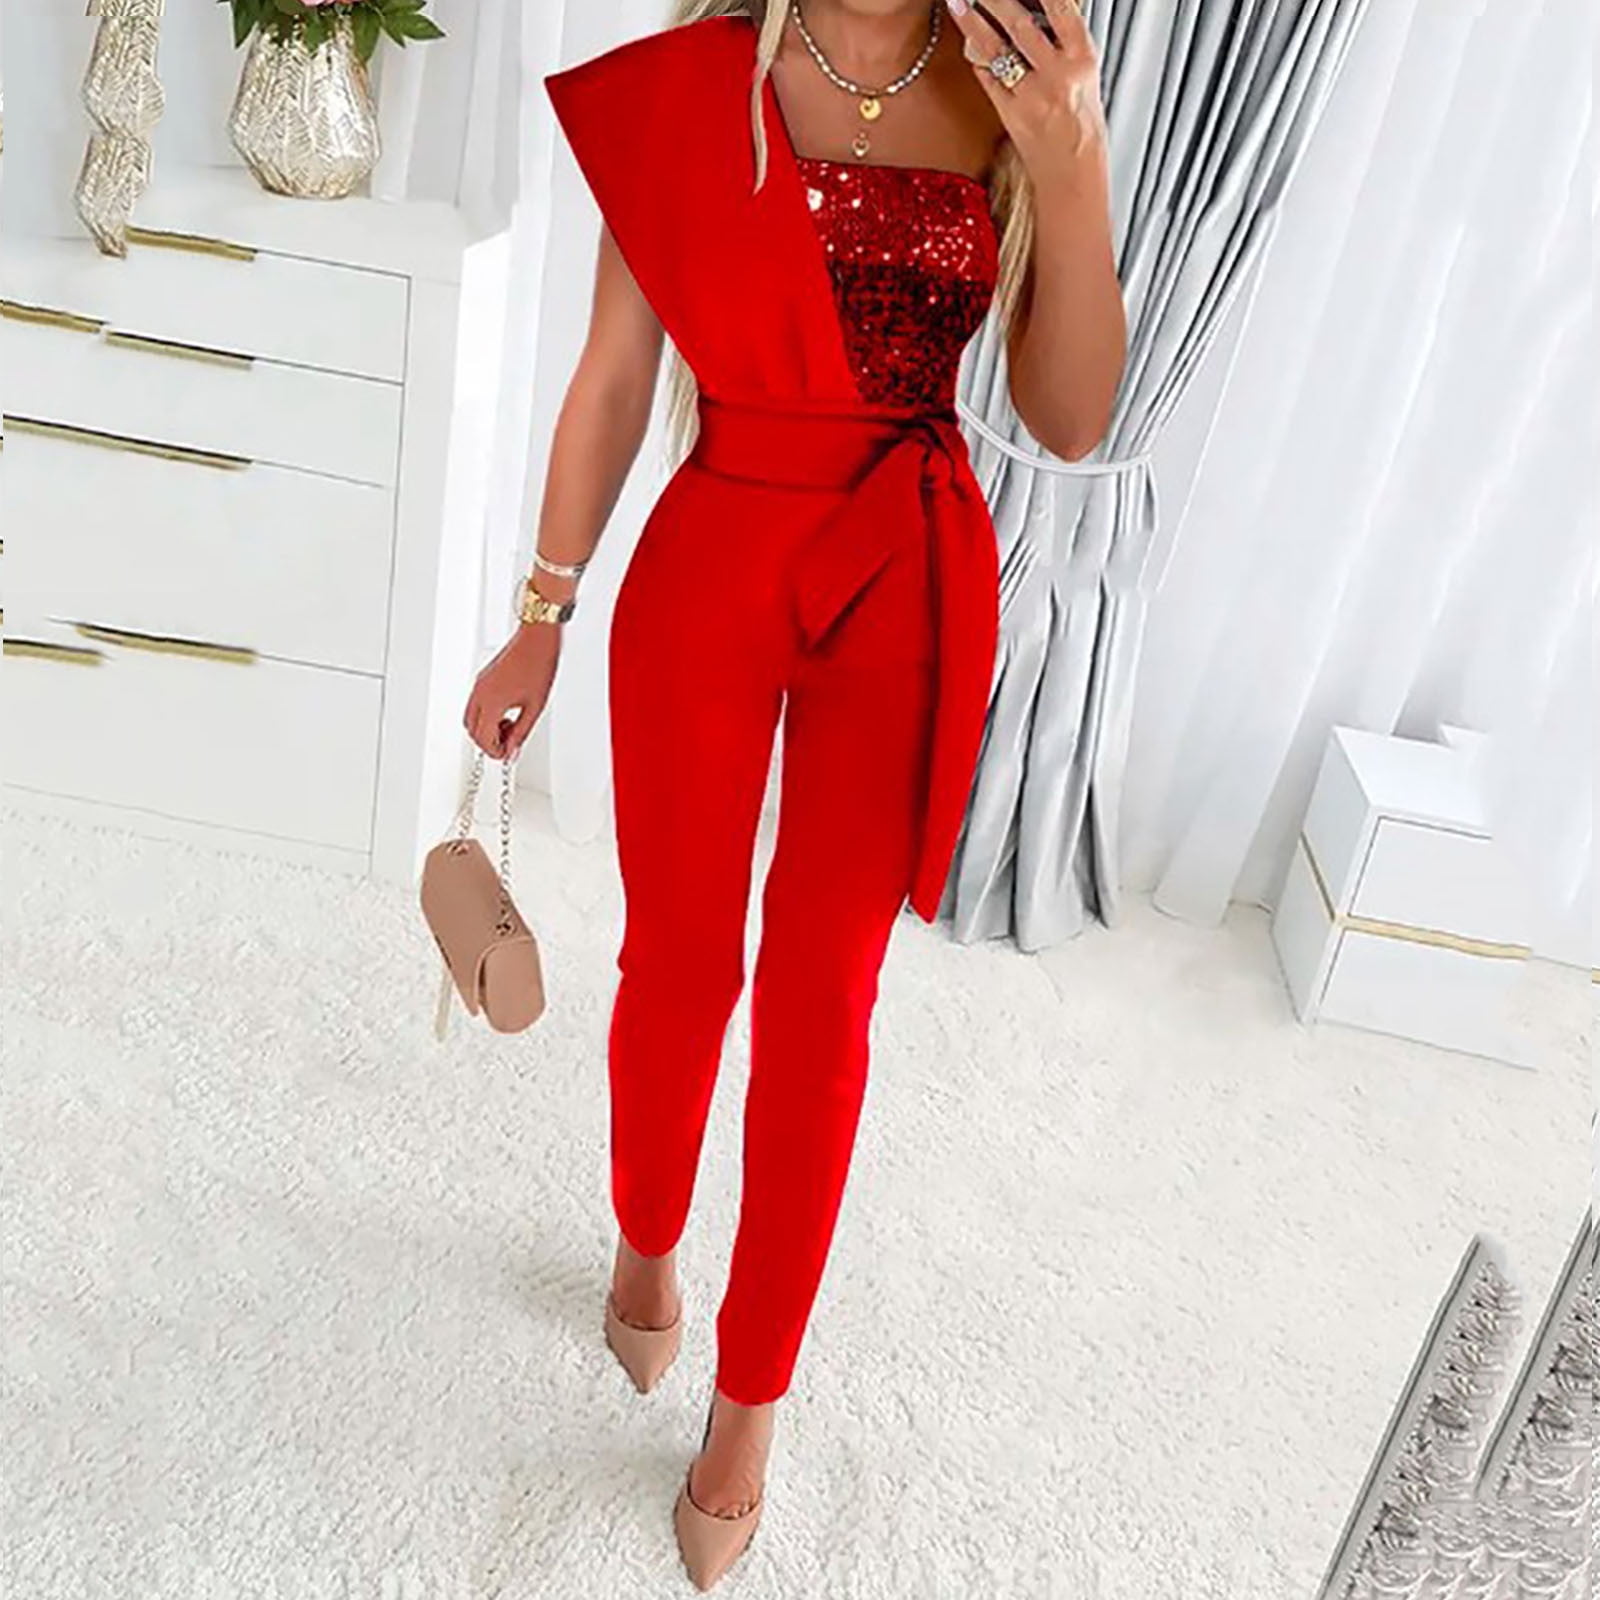 MHRCJ Overall female Long Sleeve V Neck Solid Color Knit Bandage Wed leg  Pants Jumpsuit Women Plus size (Color : Red, Size : XXXX-Large code) :  Amazon.co.uk: Fashion